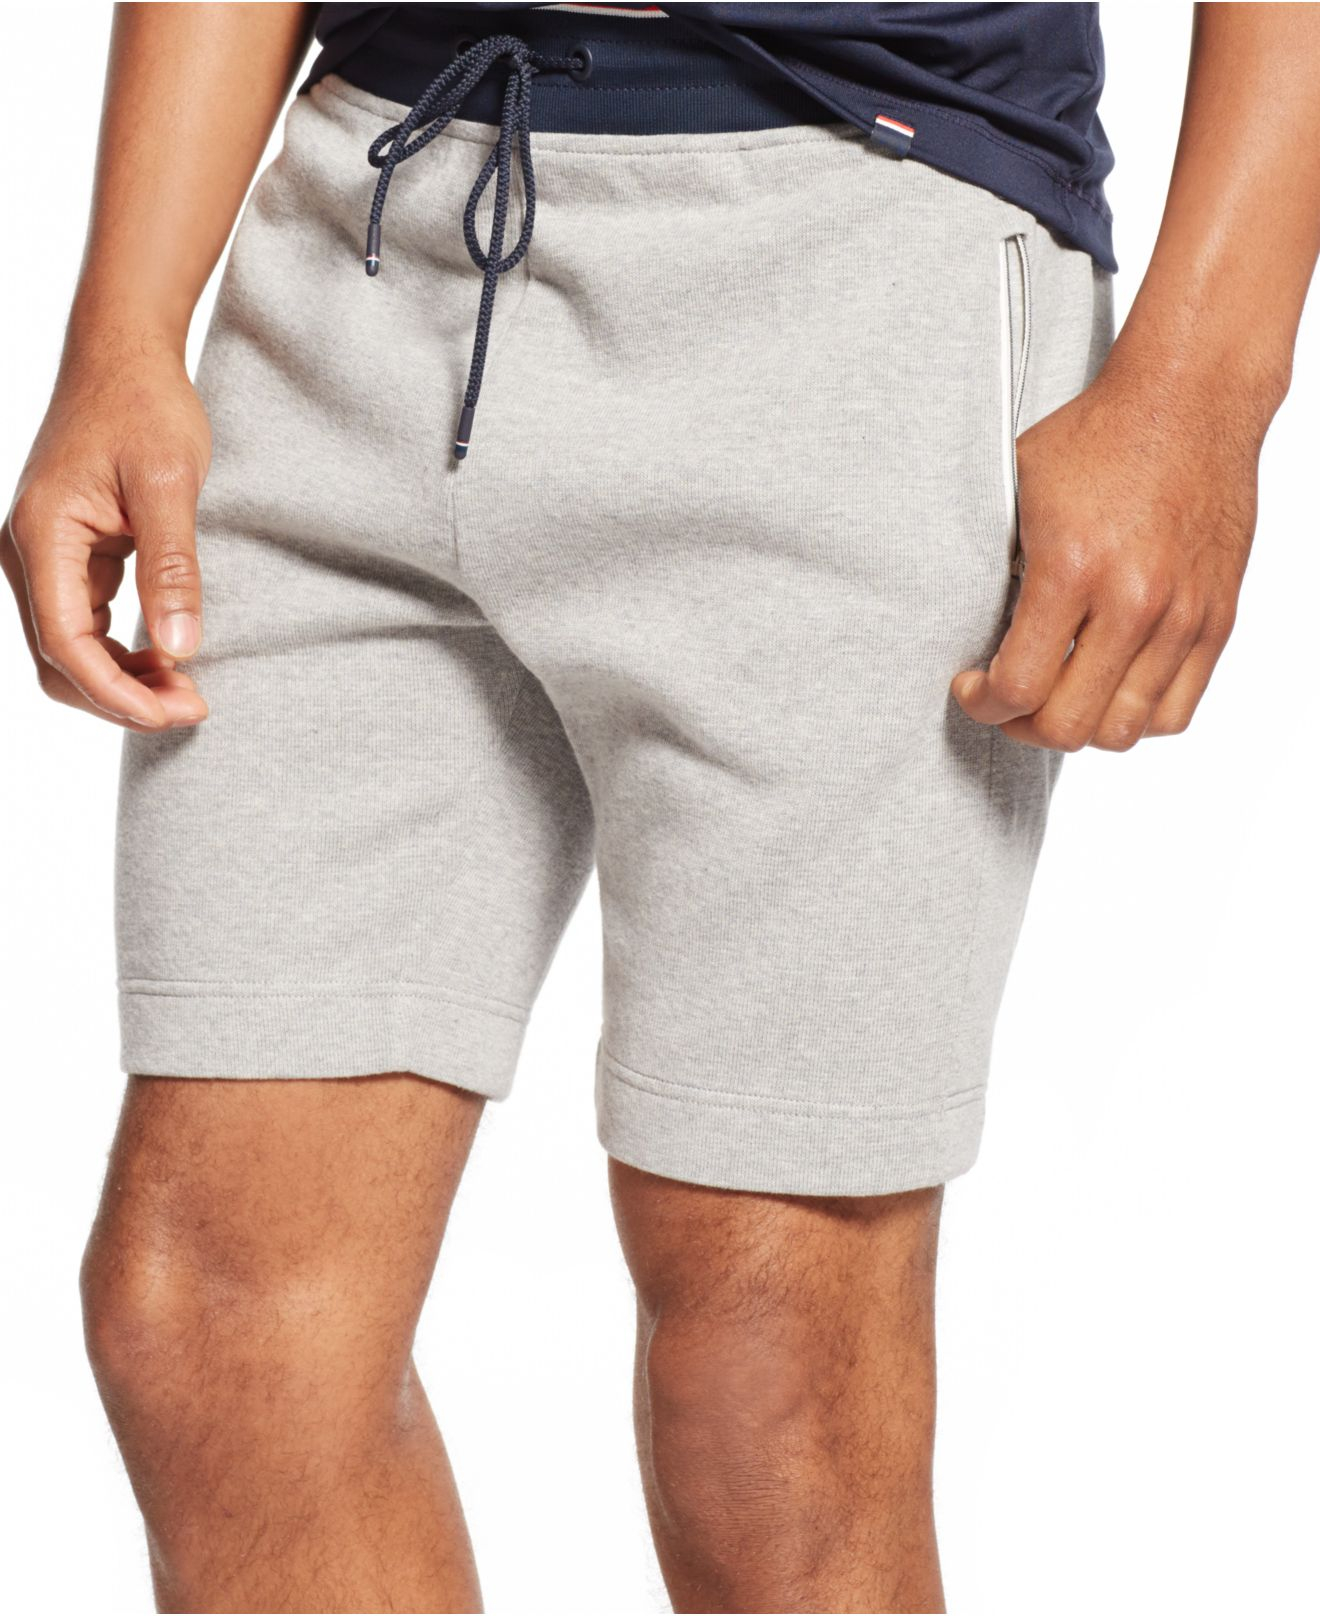 Tommy Hilfiger Gallup Track Short in Gray for Men - Lyst